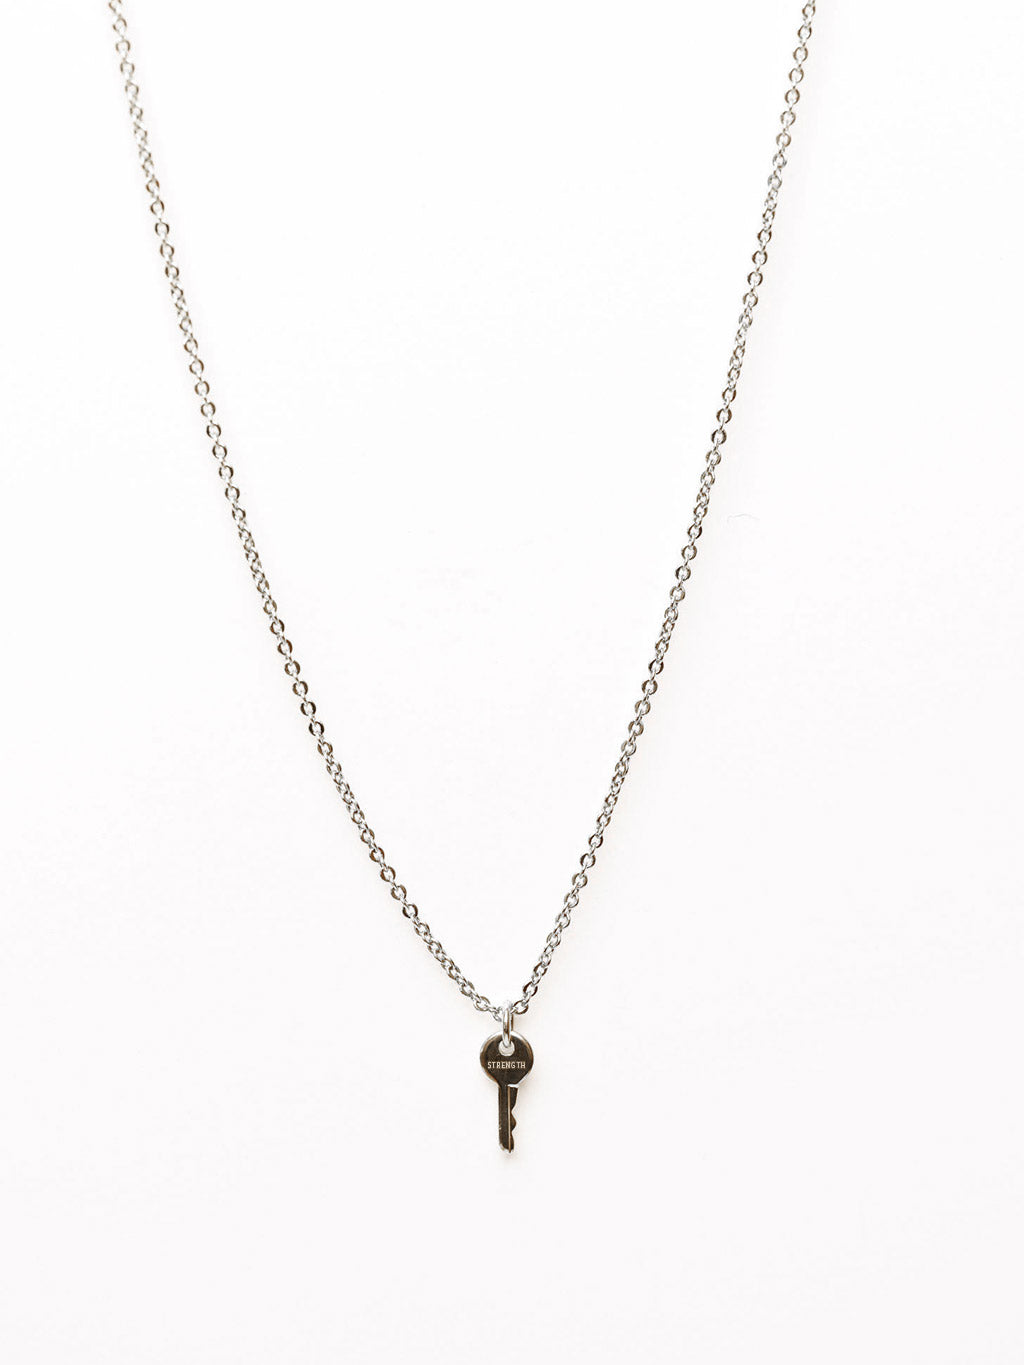 Mini Key Necklace Necklaces The Giving Keys STRENGTH Silver 